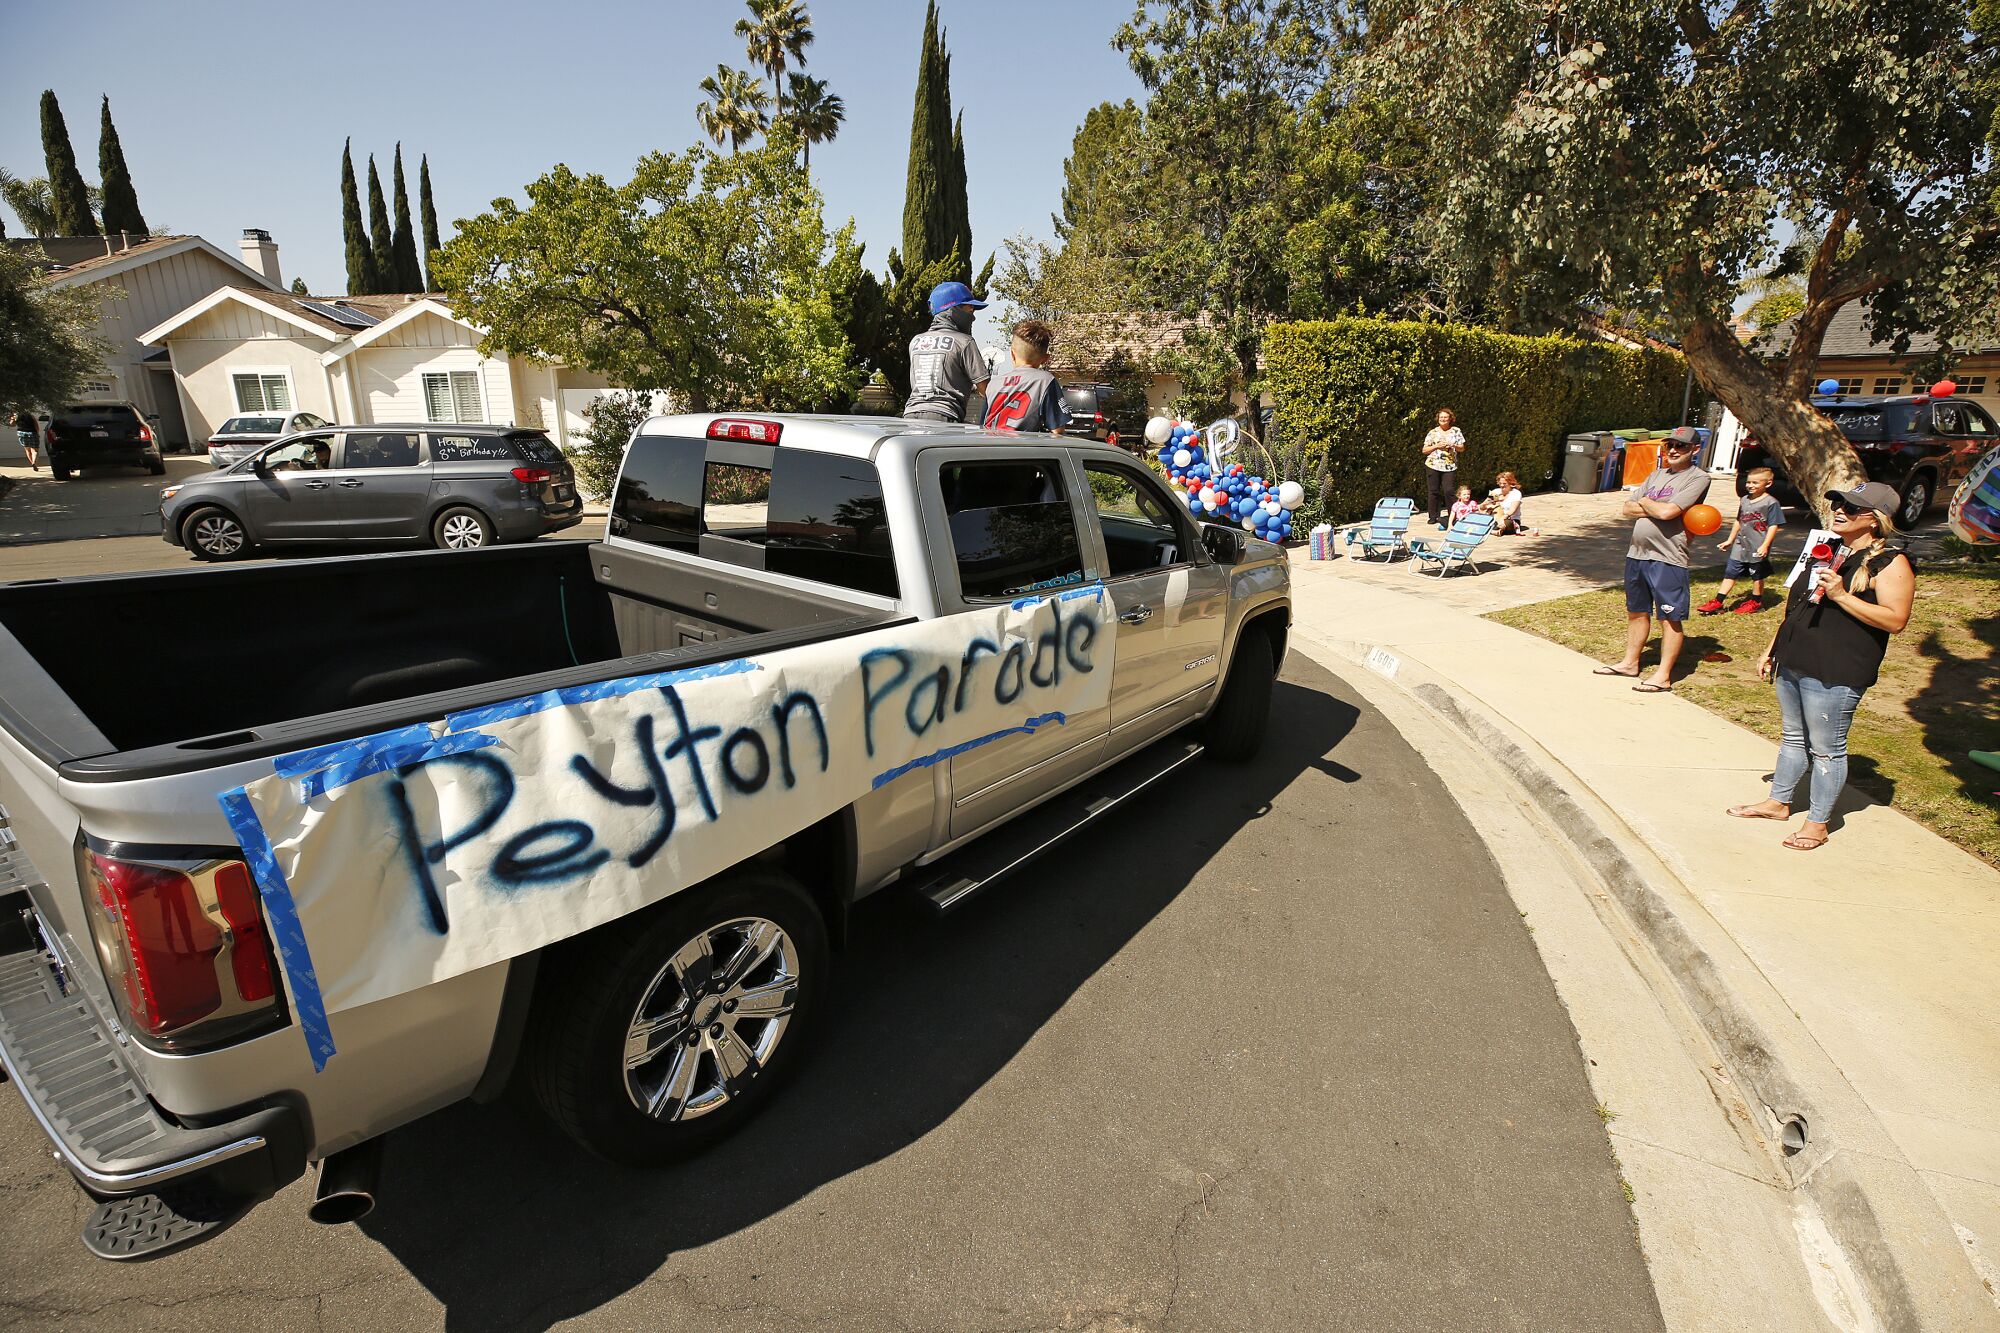 More than 25 vehicles filled with cheering parents and children drove through the cul de sac in front of the Buss home several times bestowing Peyton with balloons, gifts, cards and placards.